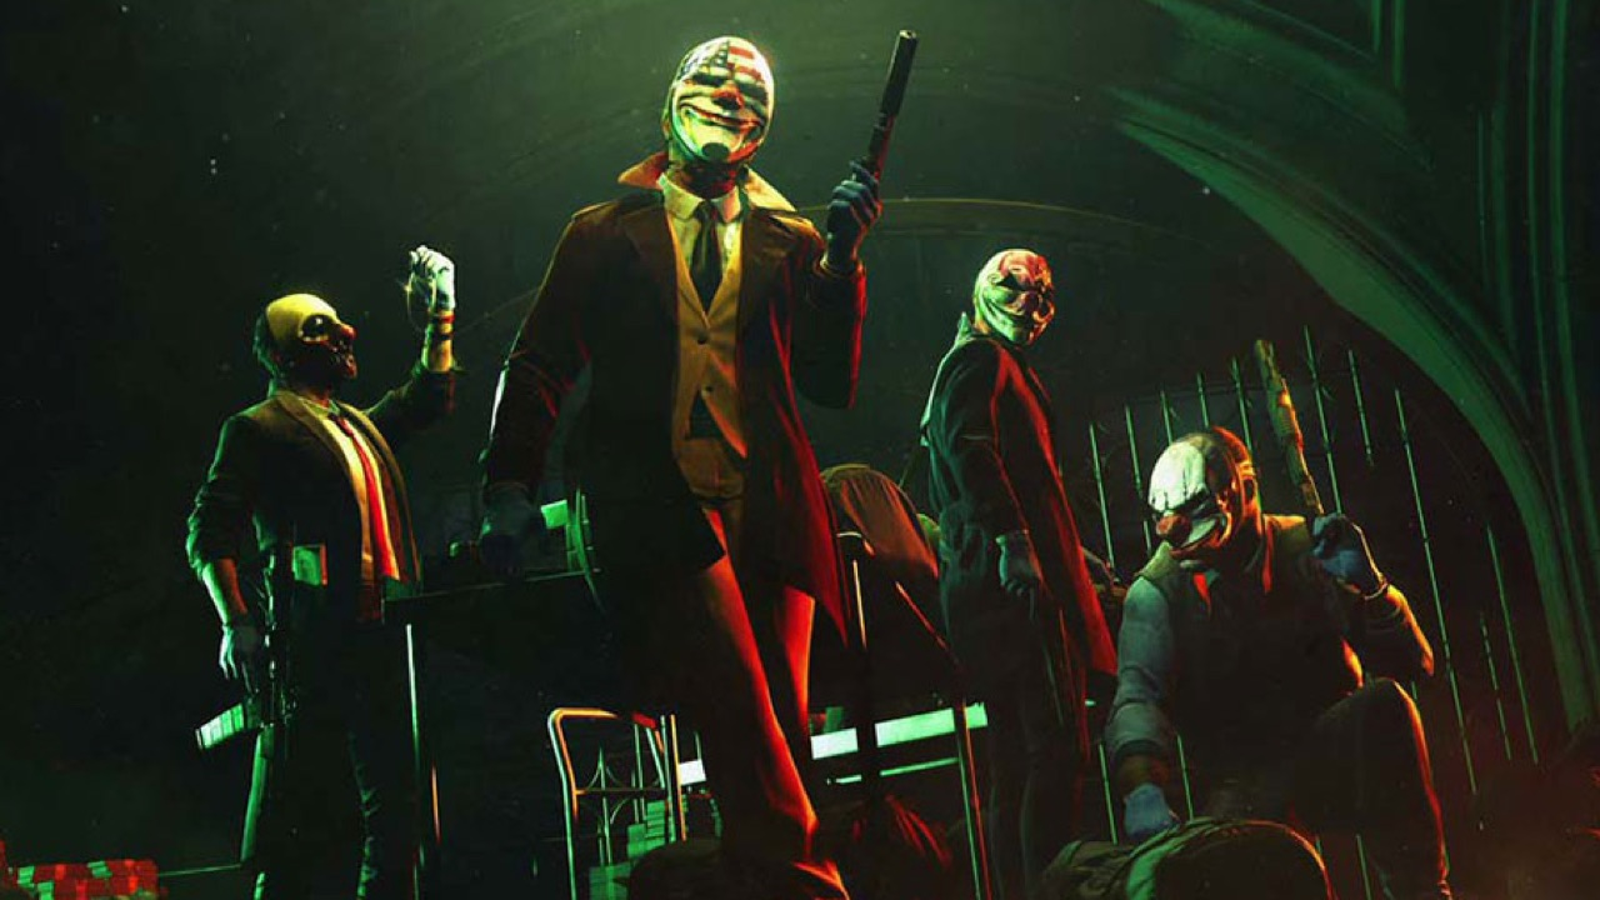 Payday 3 technical beta starts soon, open to everyone – Destructoid